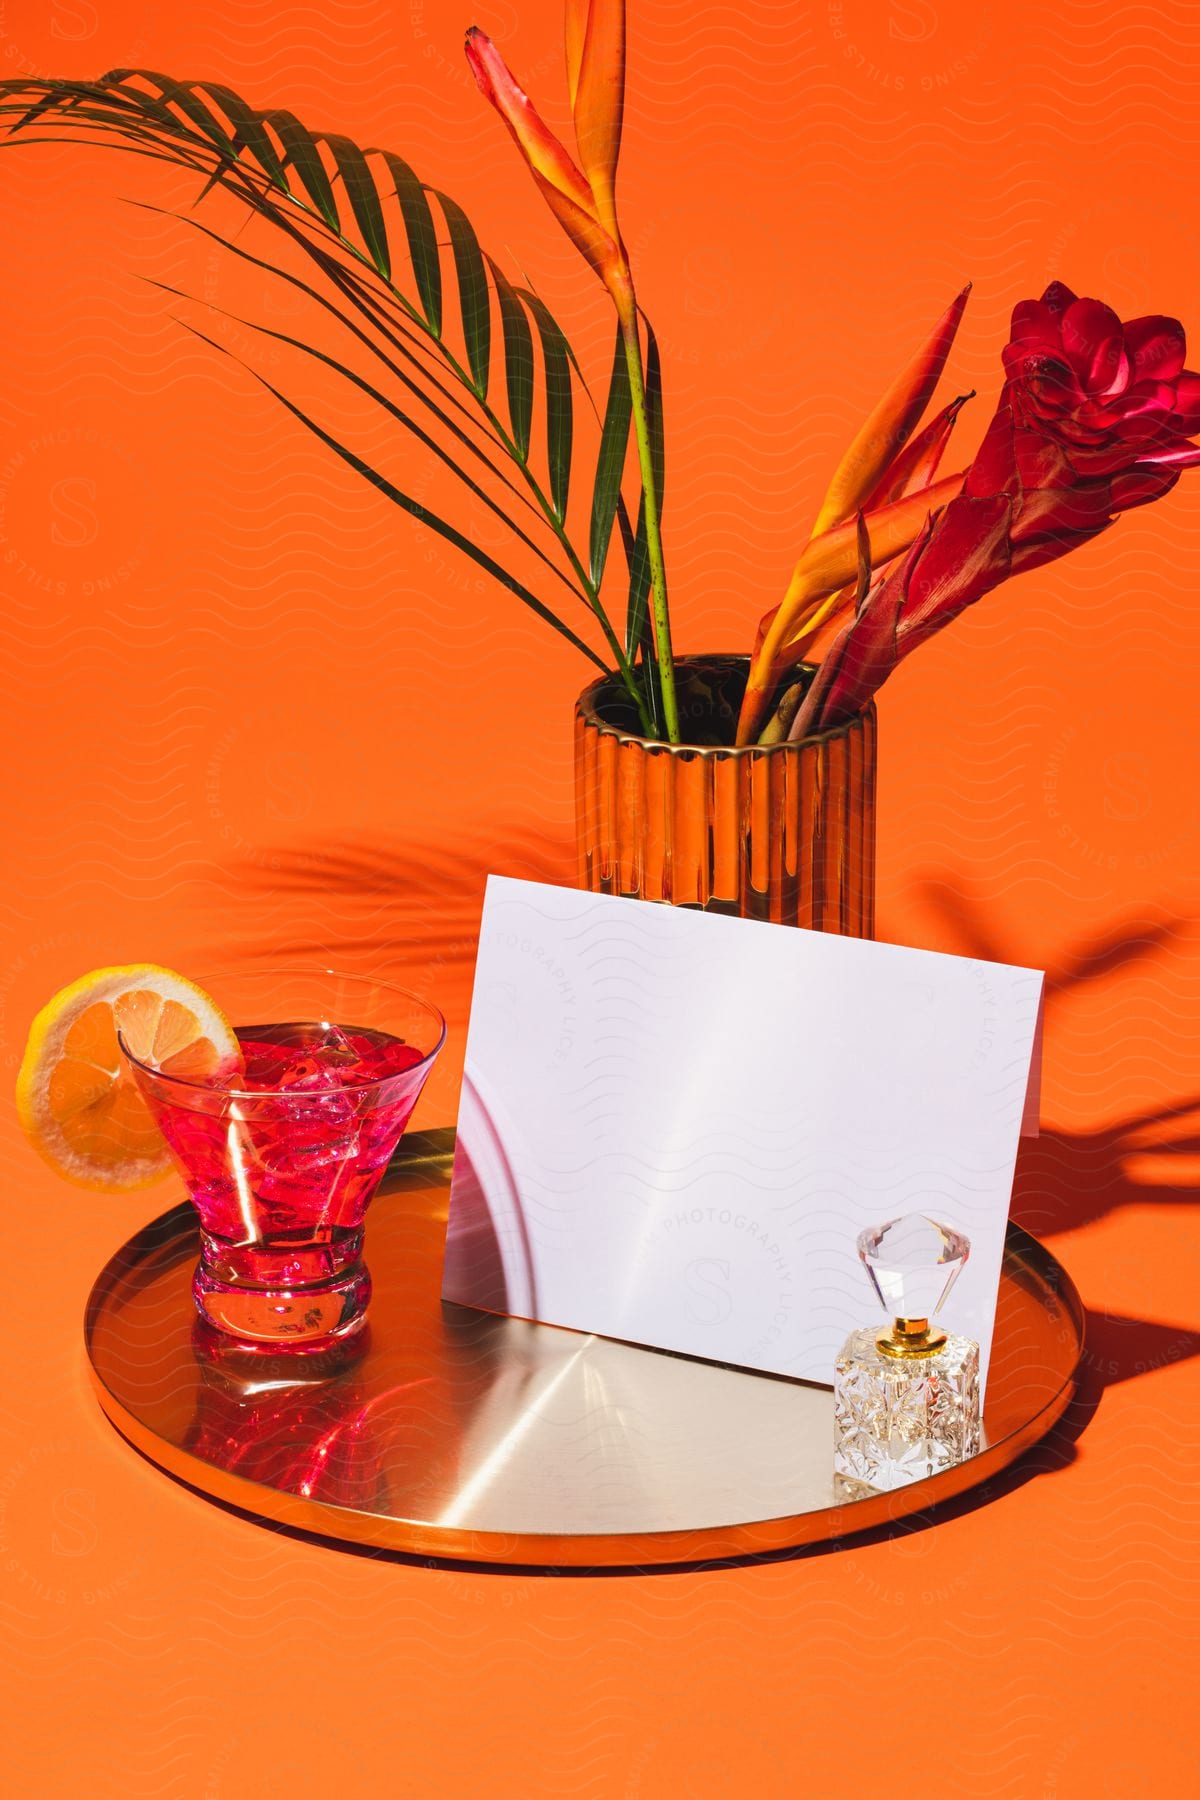 a cocktail served on a glass with a slice of lime and place on a tray next to an envelop and ring case with a flower behind on an orange background